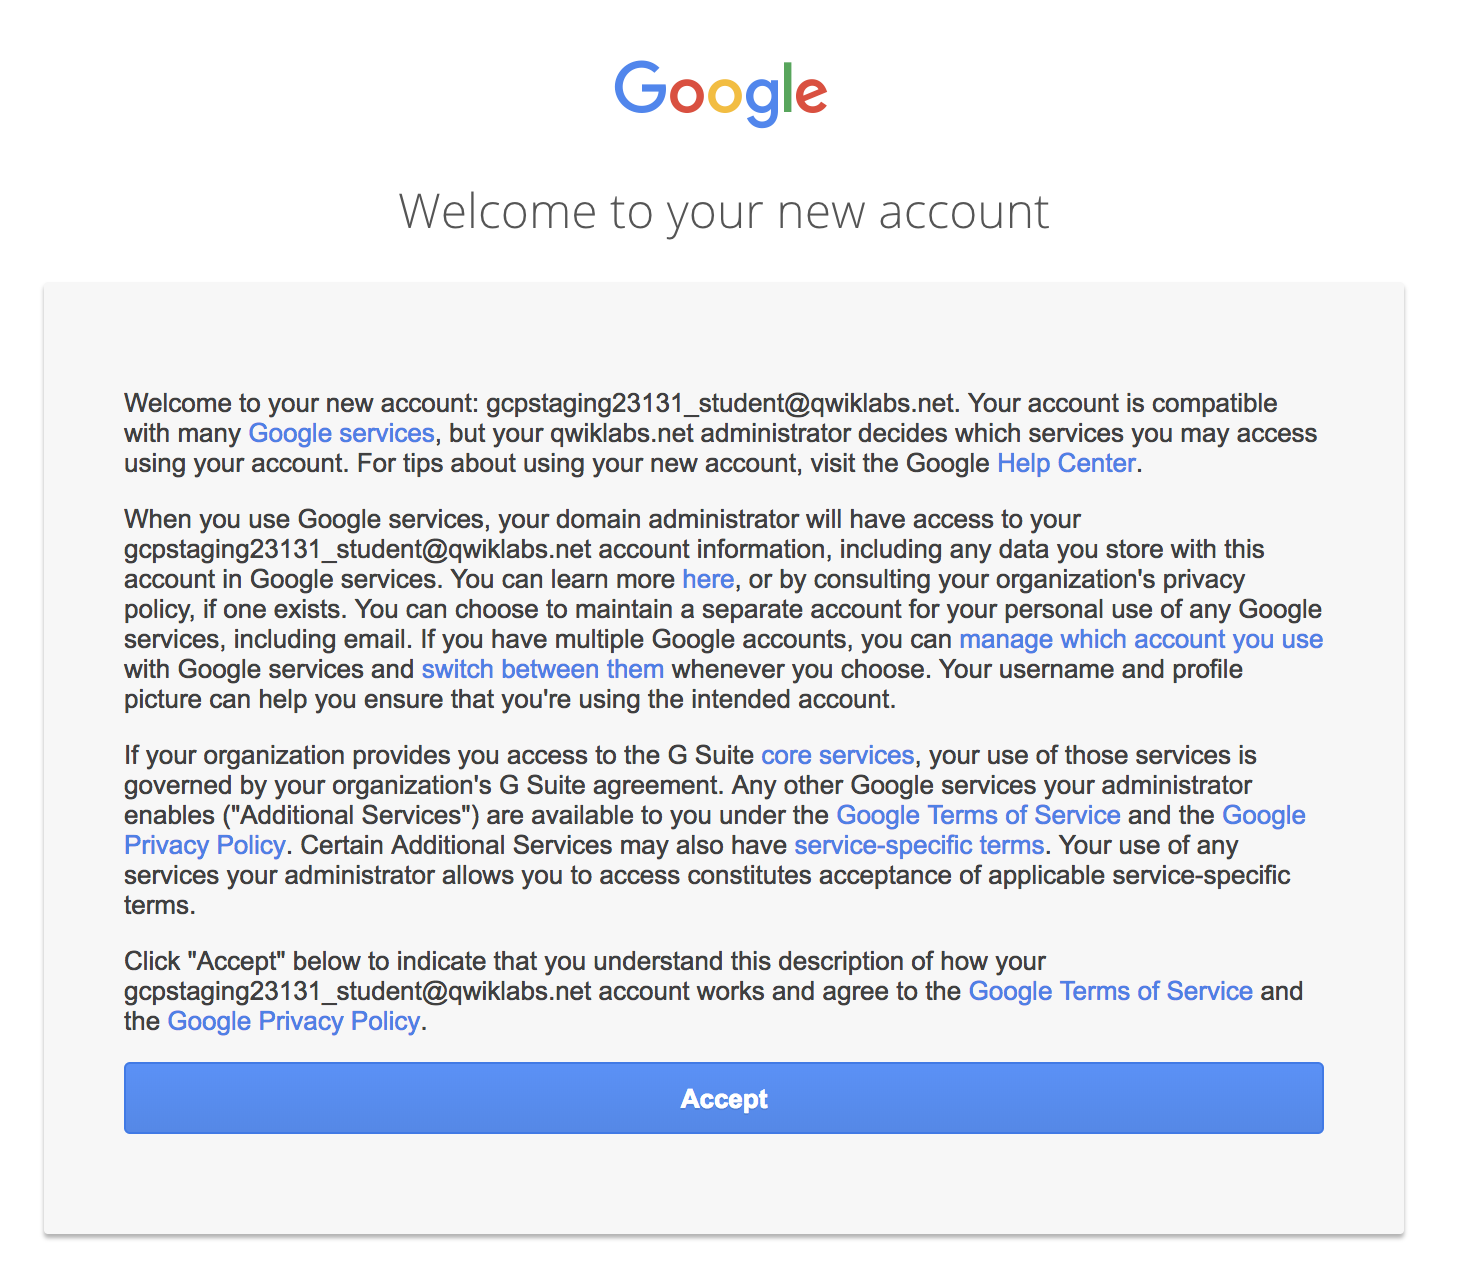 Google terms of service